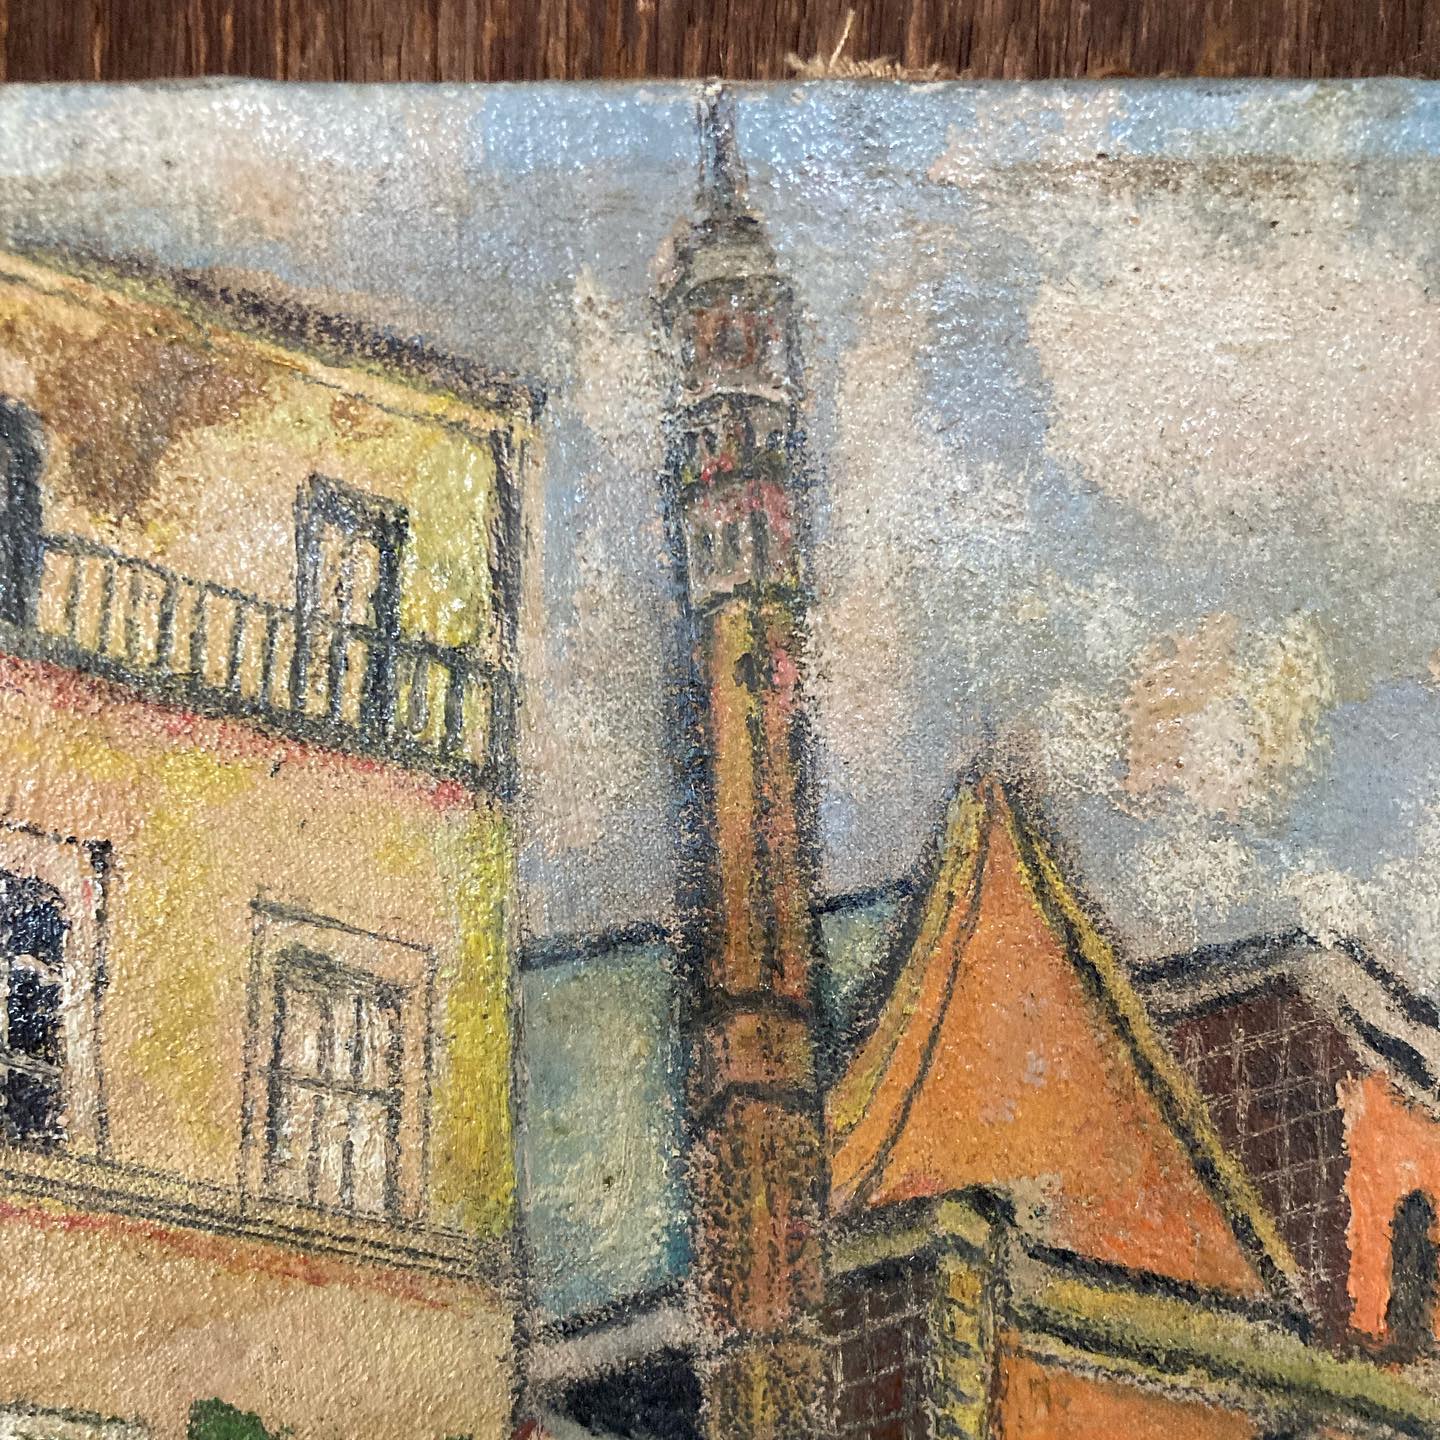 Small naive oil on canvas painting, French or more likely North African, possibly Algeria, Morocco or Egypt, with minaret, c. 1930